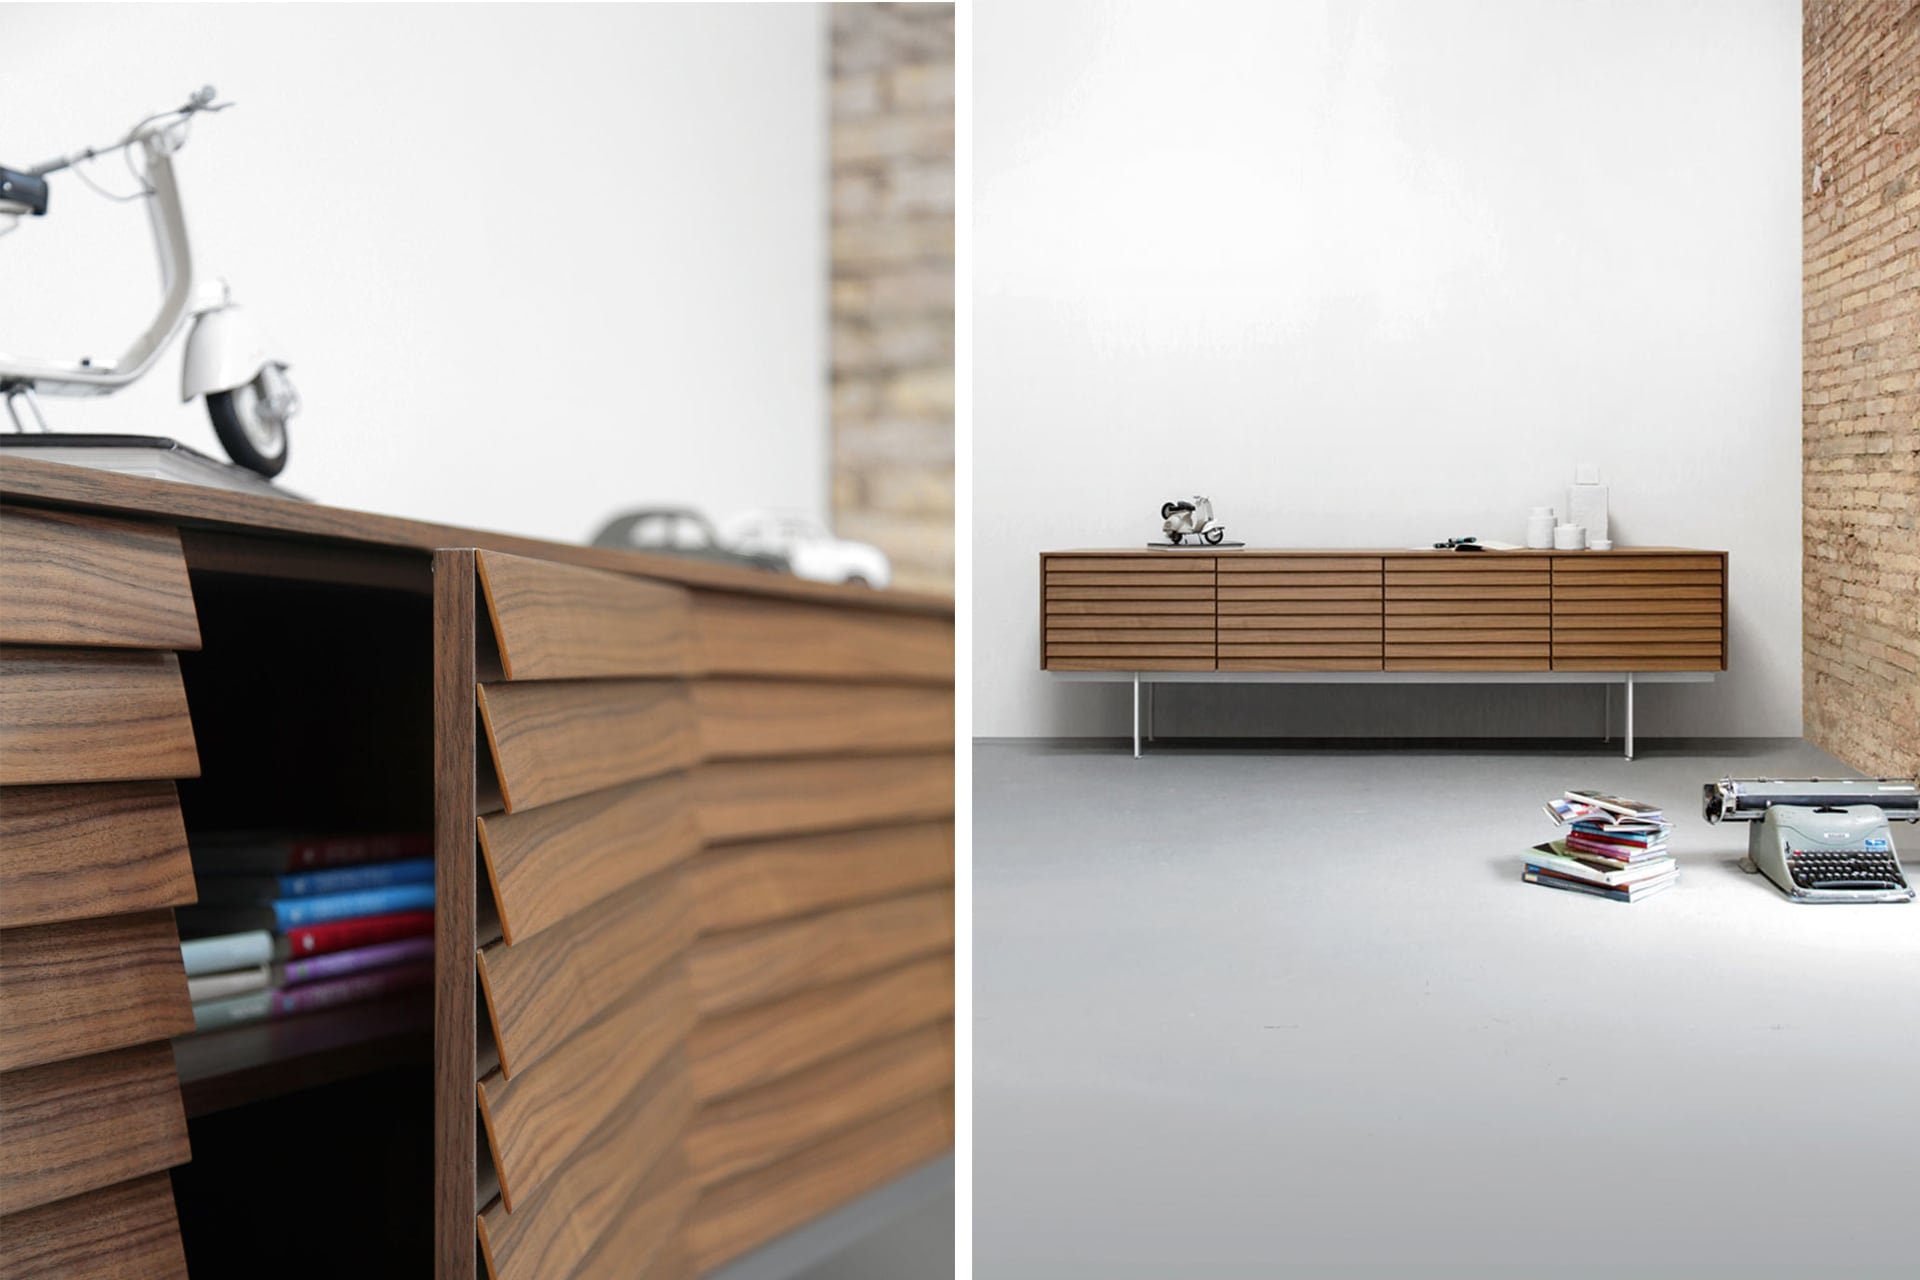 Sussex Sideboard from Punt Mobles, designed by Terence Woodgate